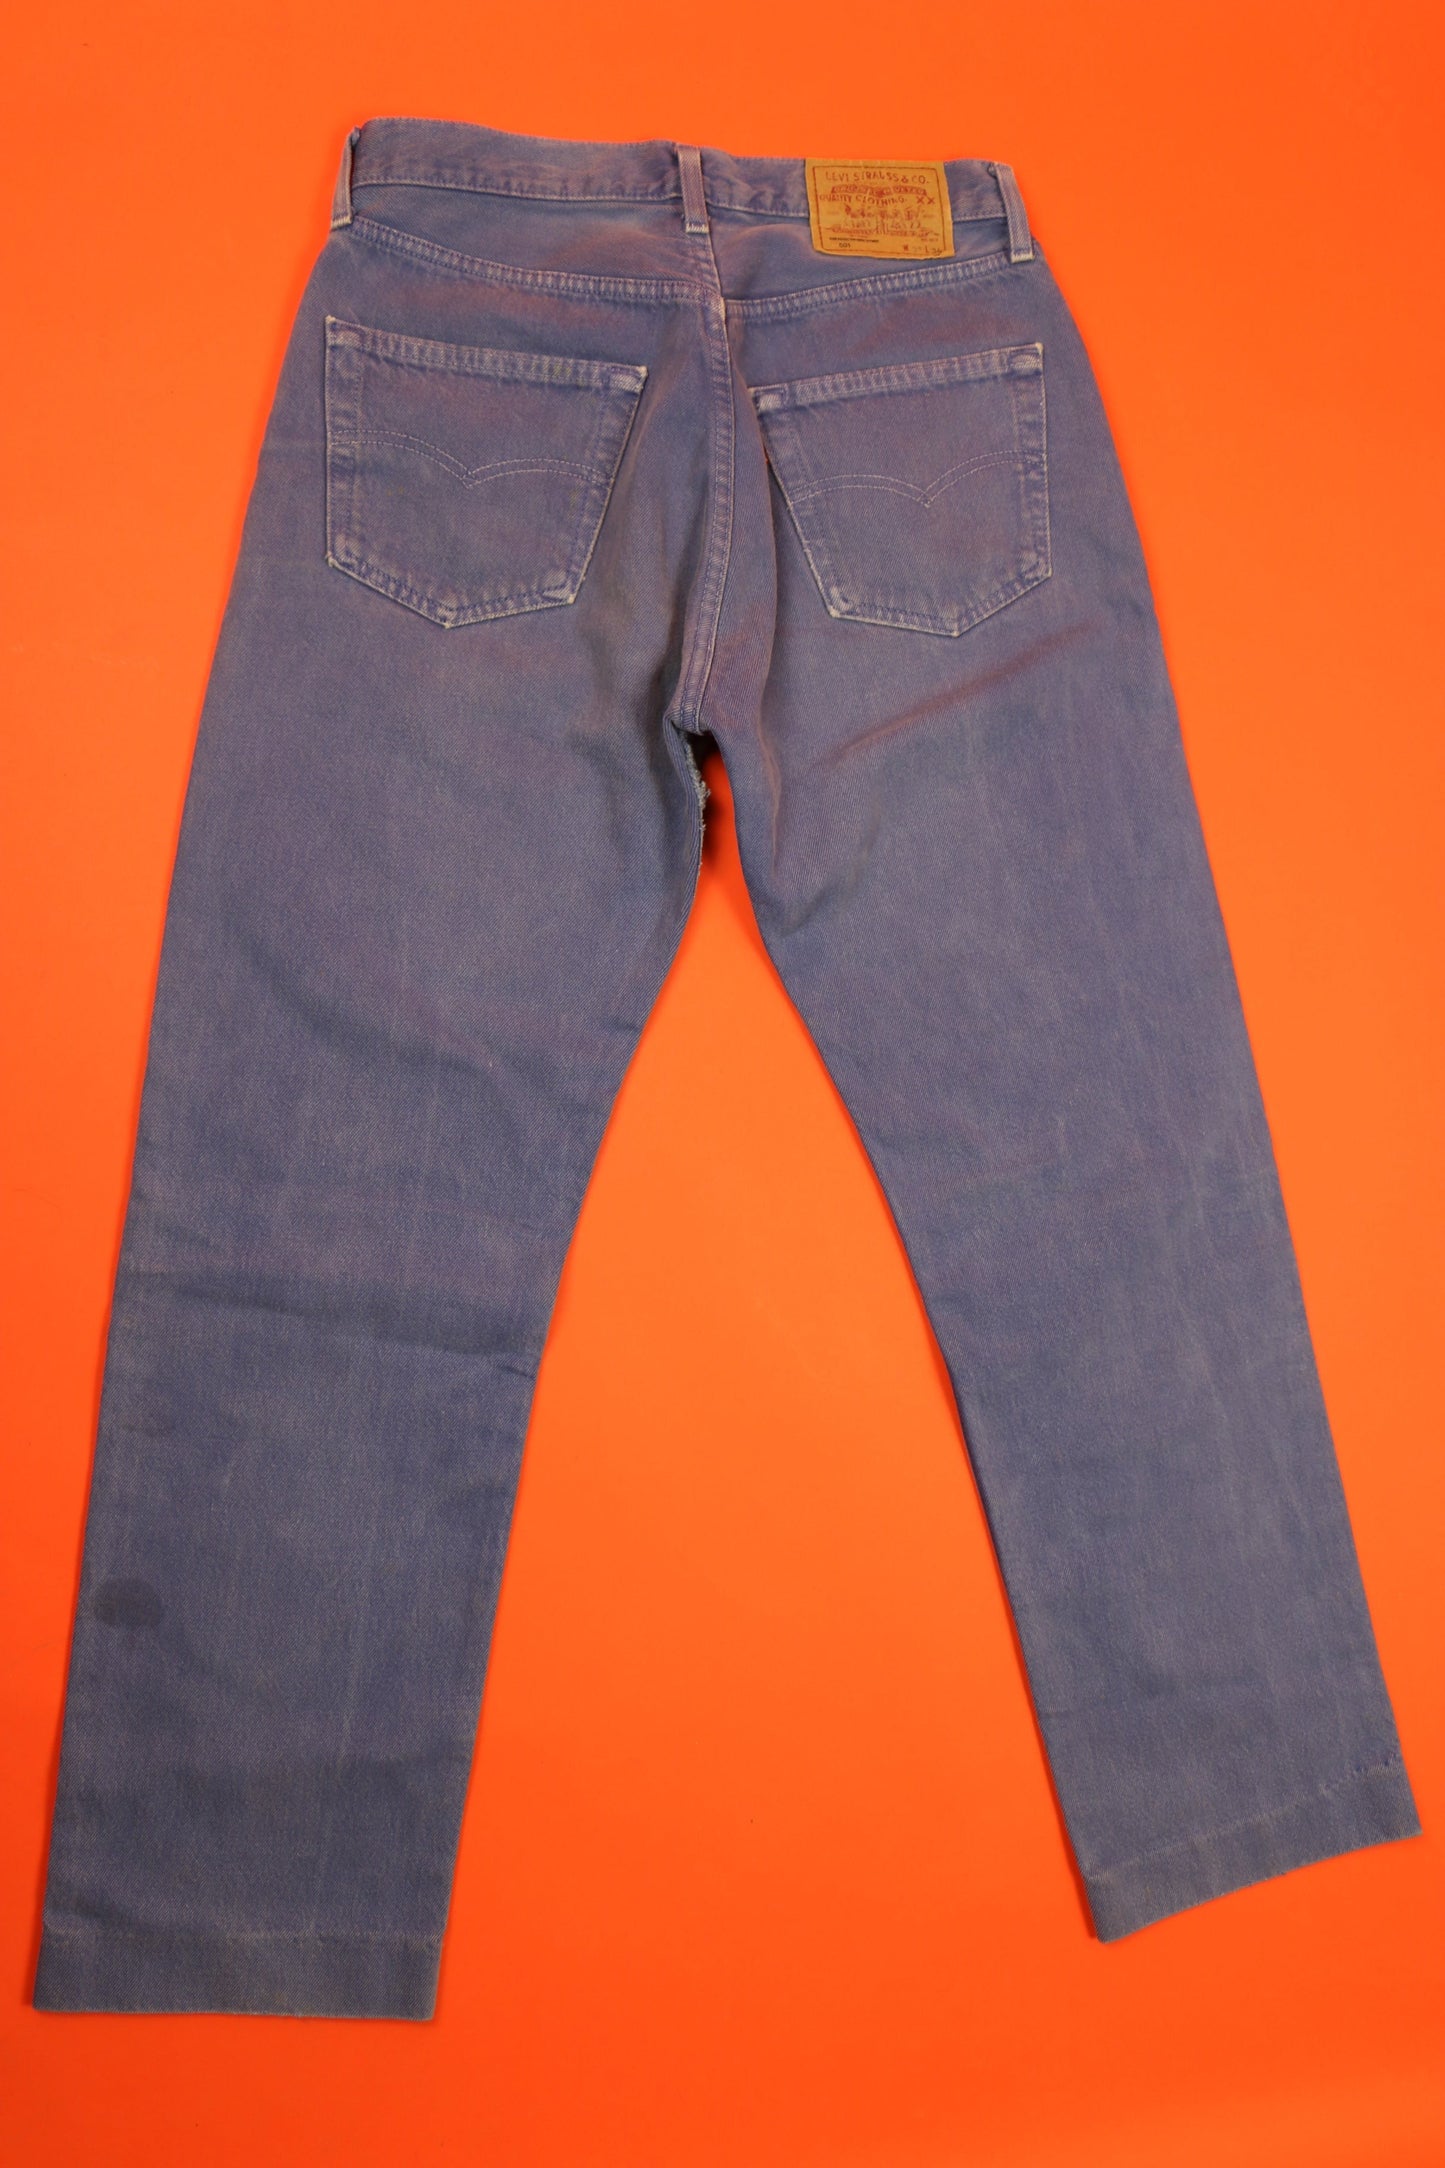 Levi's 501 Jeans Made in U.S.A. 'W31 L34' - vintage clothing clochard92.com